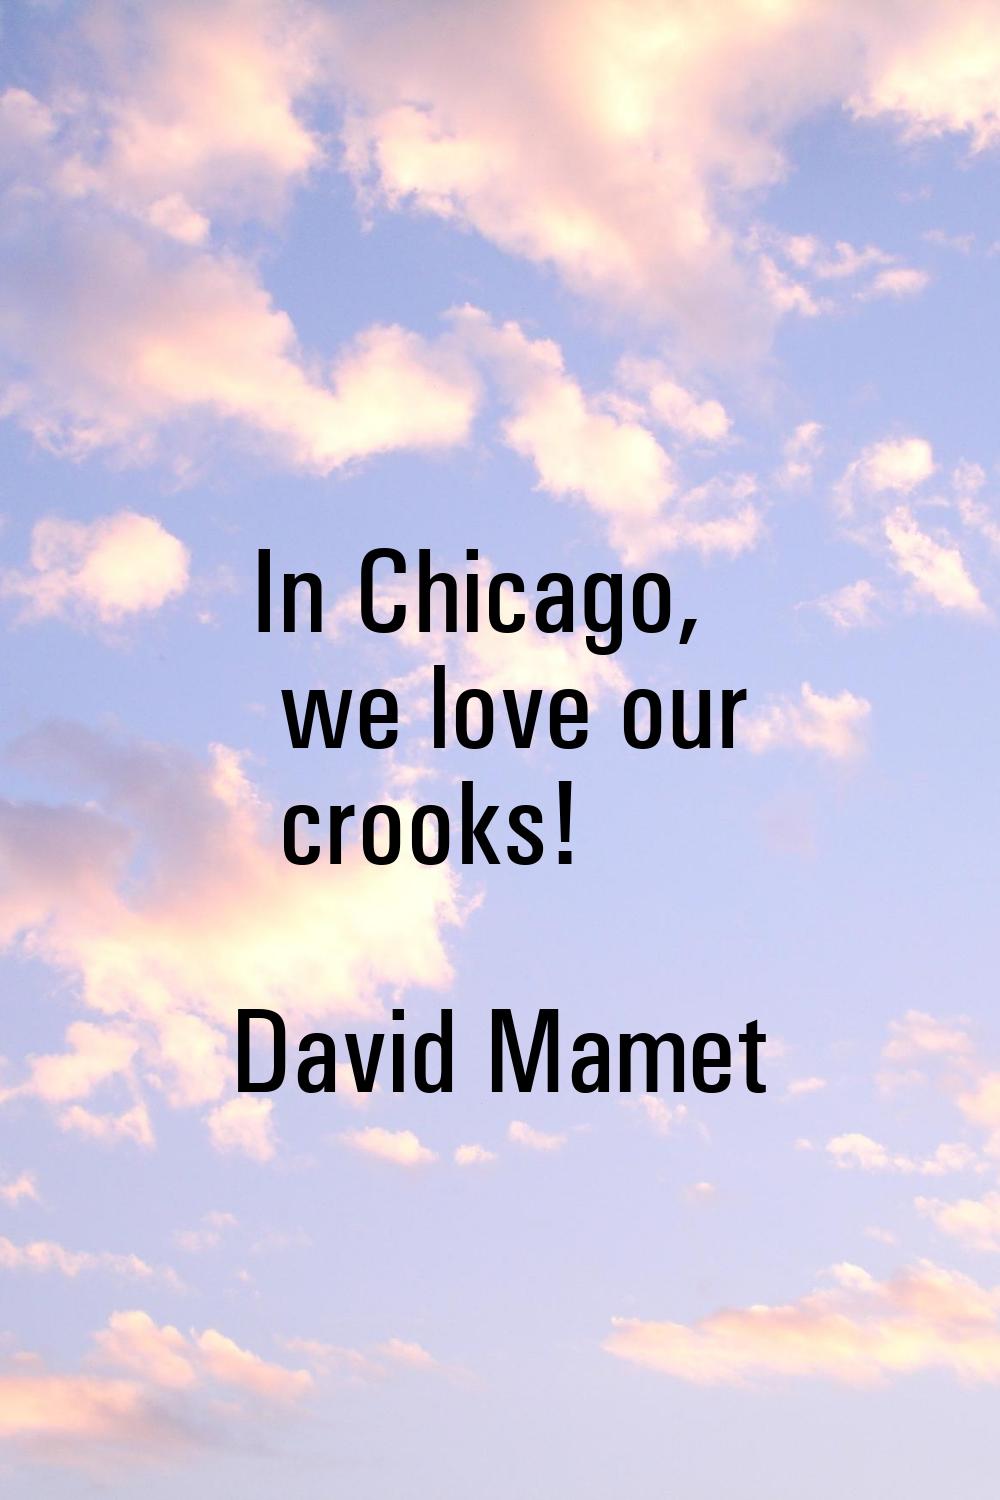 In Chicago, we love our crooks!